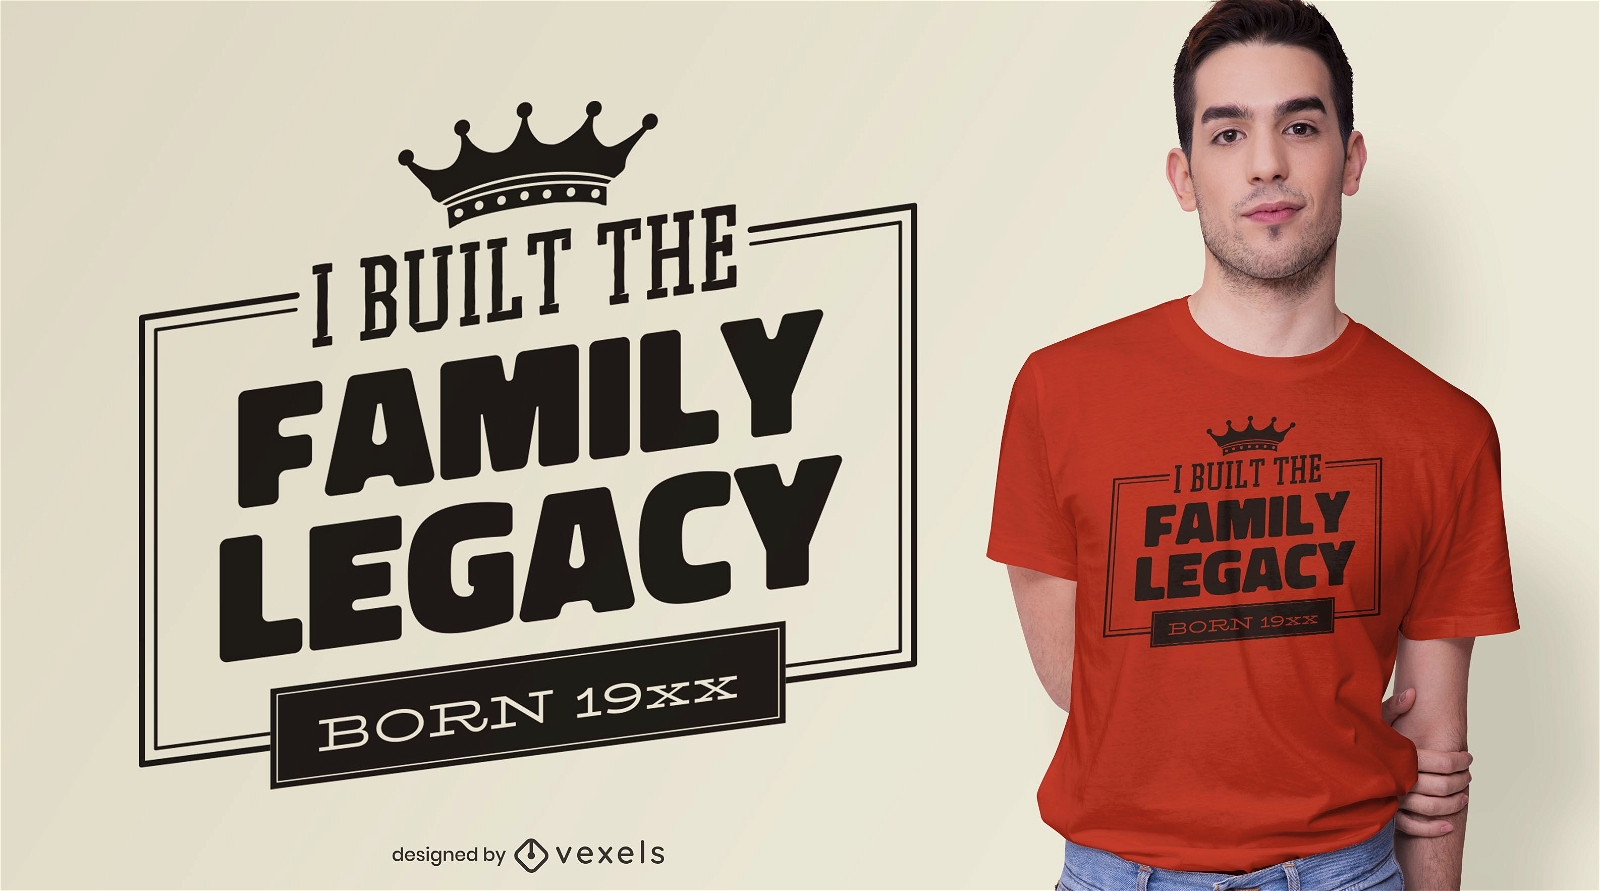 Family legacy quote t-shirt design